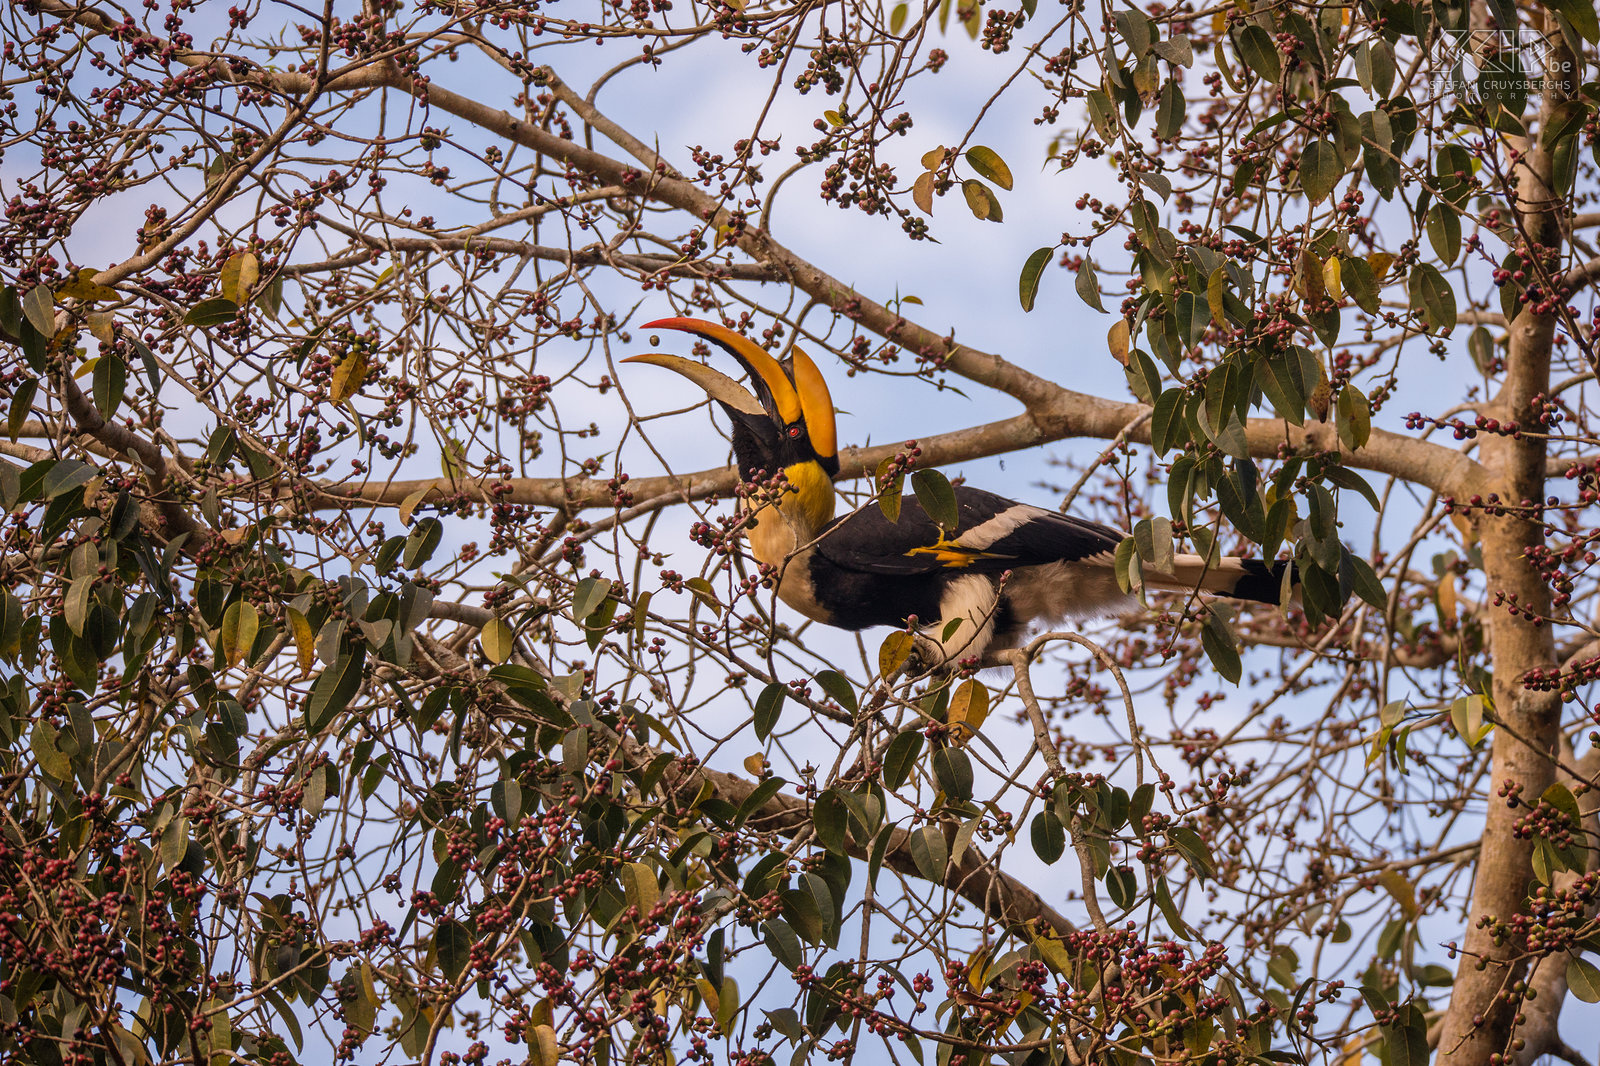 Valparai - Great Indian hornbill In the green forests near the tea fields of Valparai there is also a lot of wildlife and it is an excellent location to see unique animals. The Great Indian hornbill (Buceros bicornis) is the largest hornbill in south India. It is predominantly frugivorous, but they also eat small mammals, reptiles and birds. They can become 95–130cm long with a winspan of 150cm. Stefan Cruysberghs